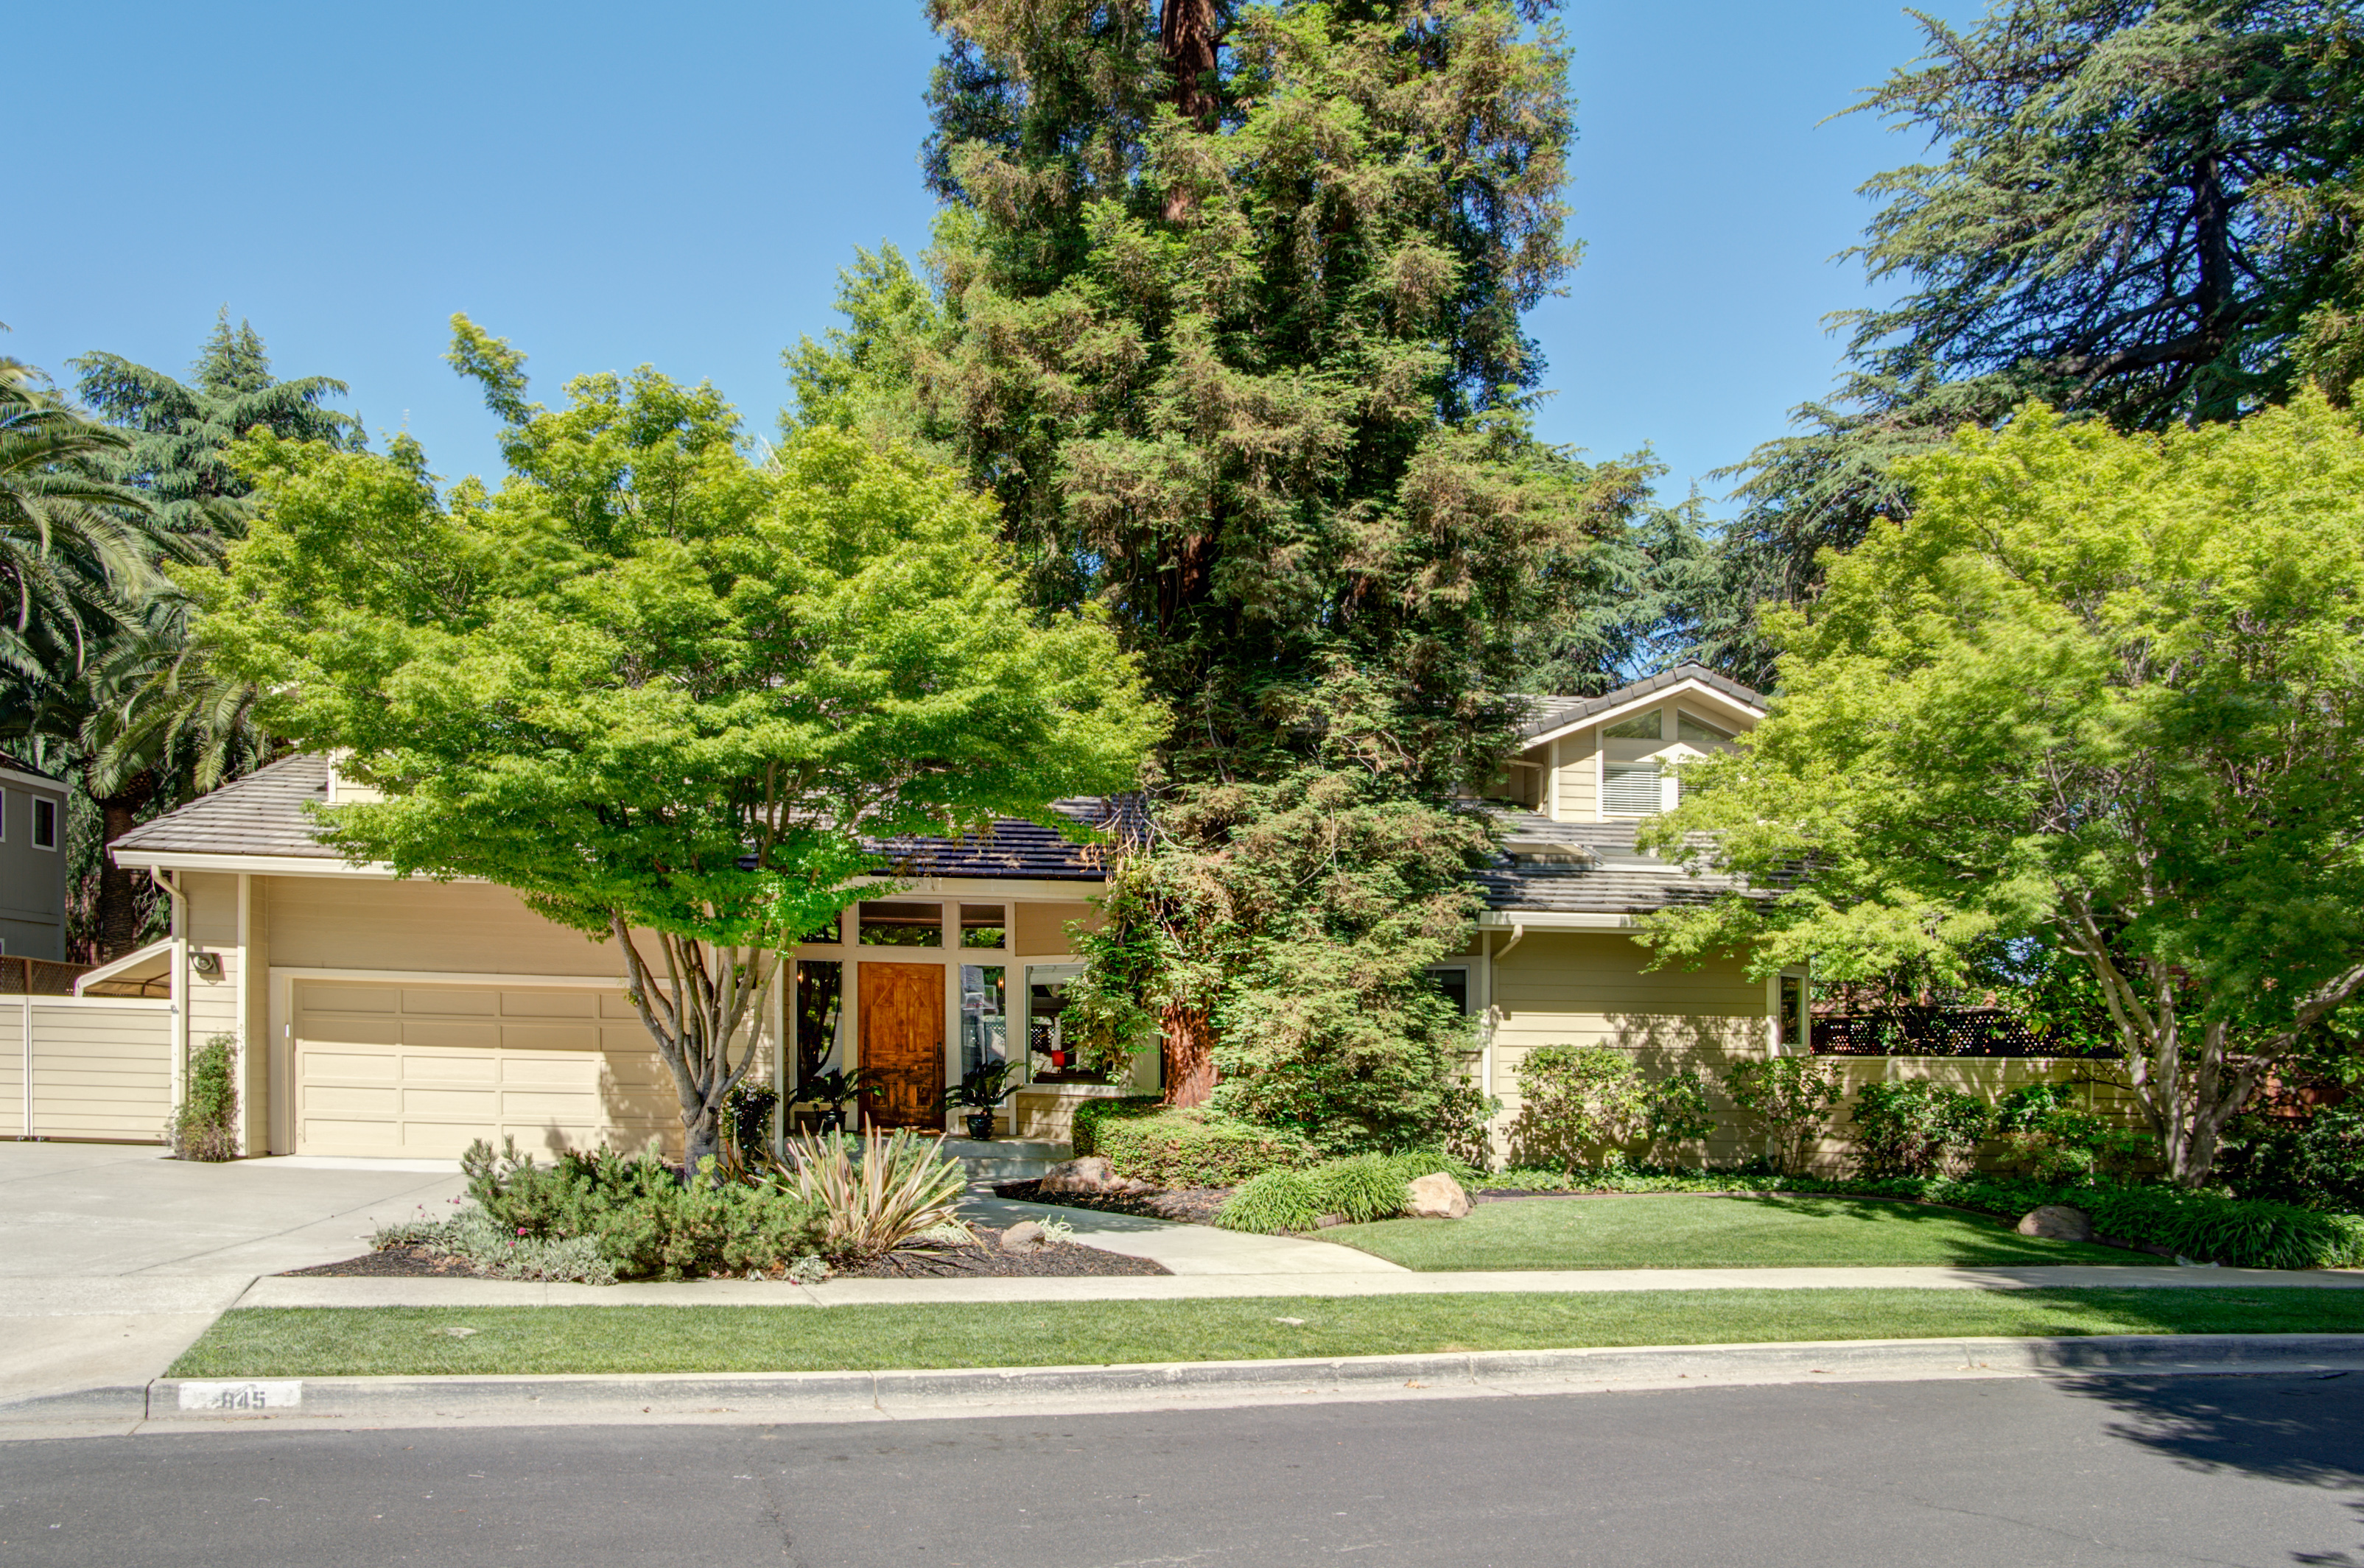 845_Kingsbury_Dr_Livermore-002